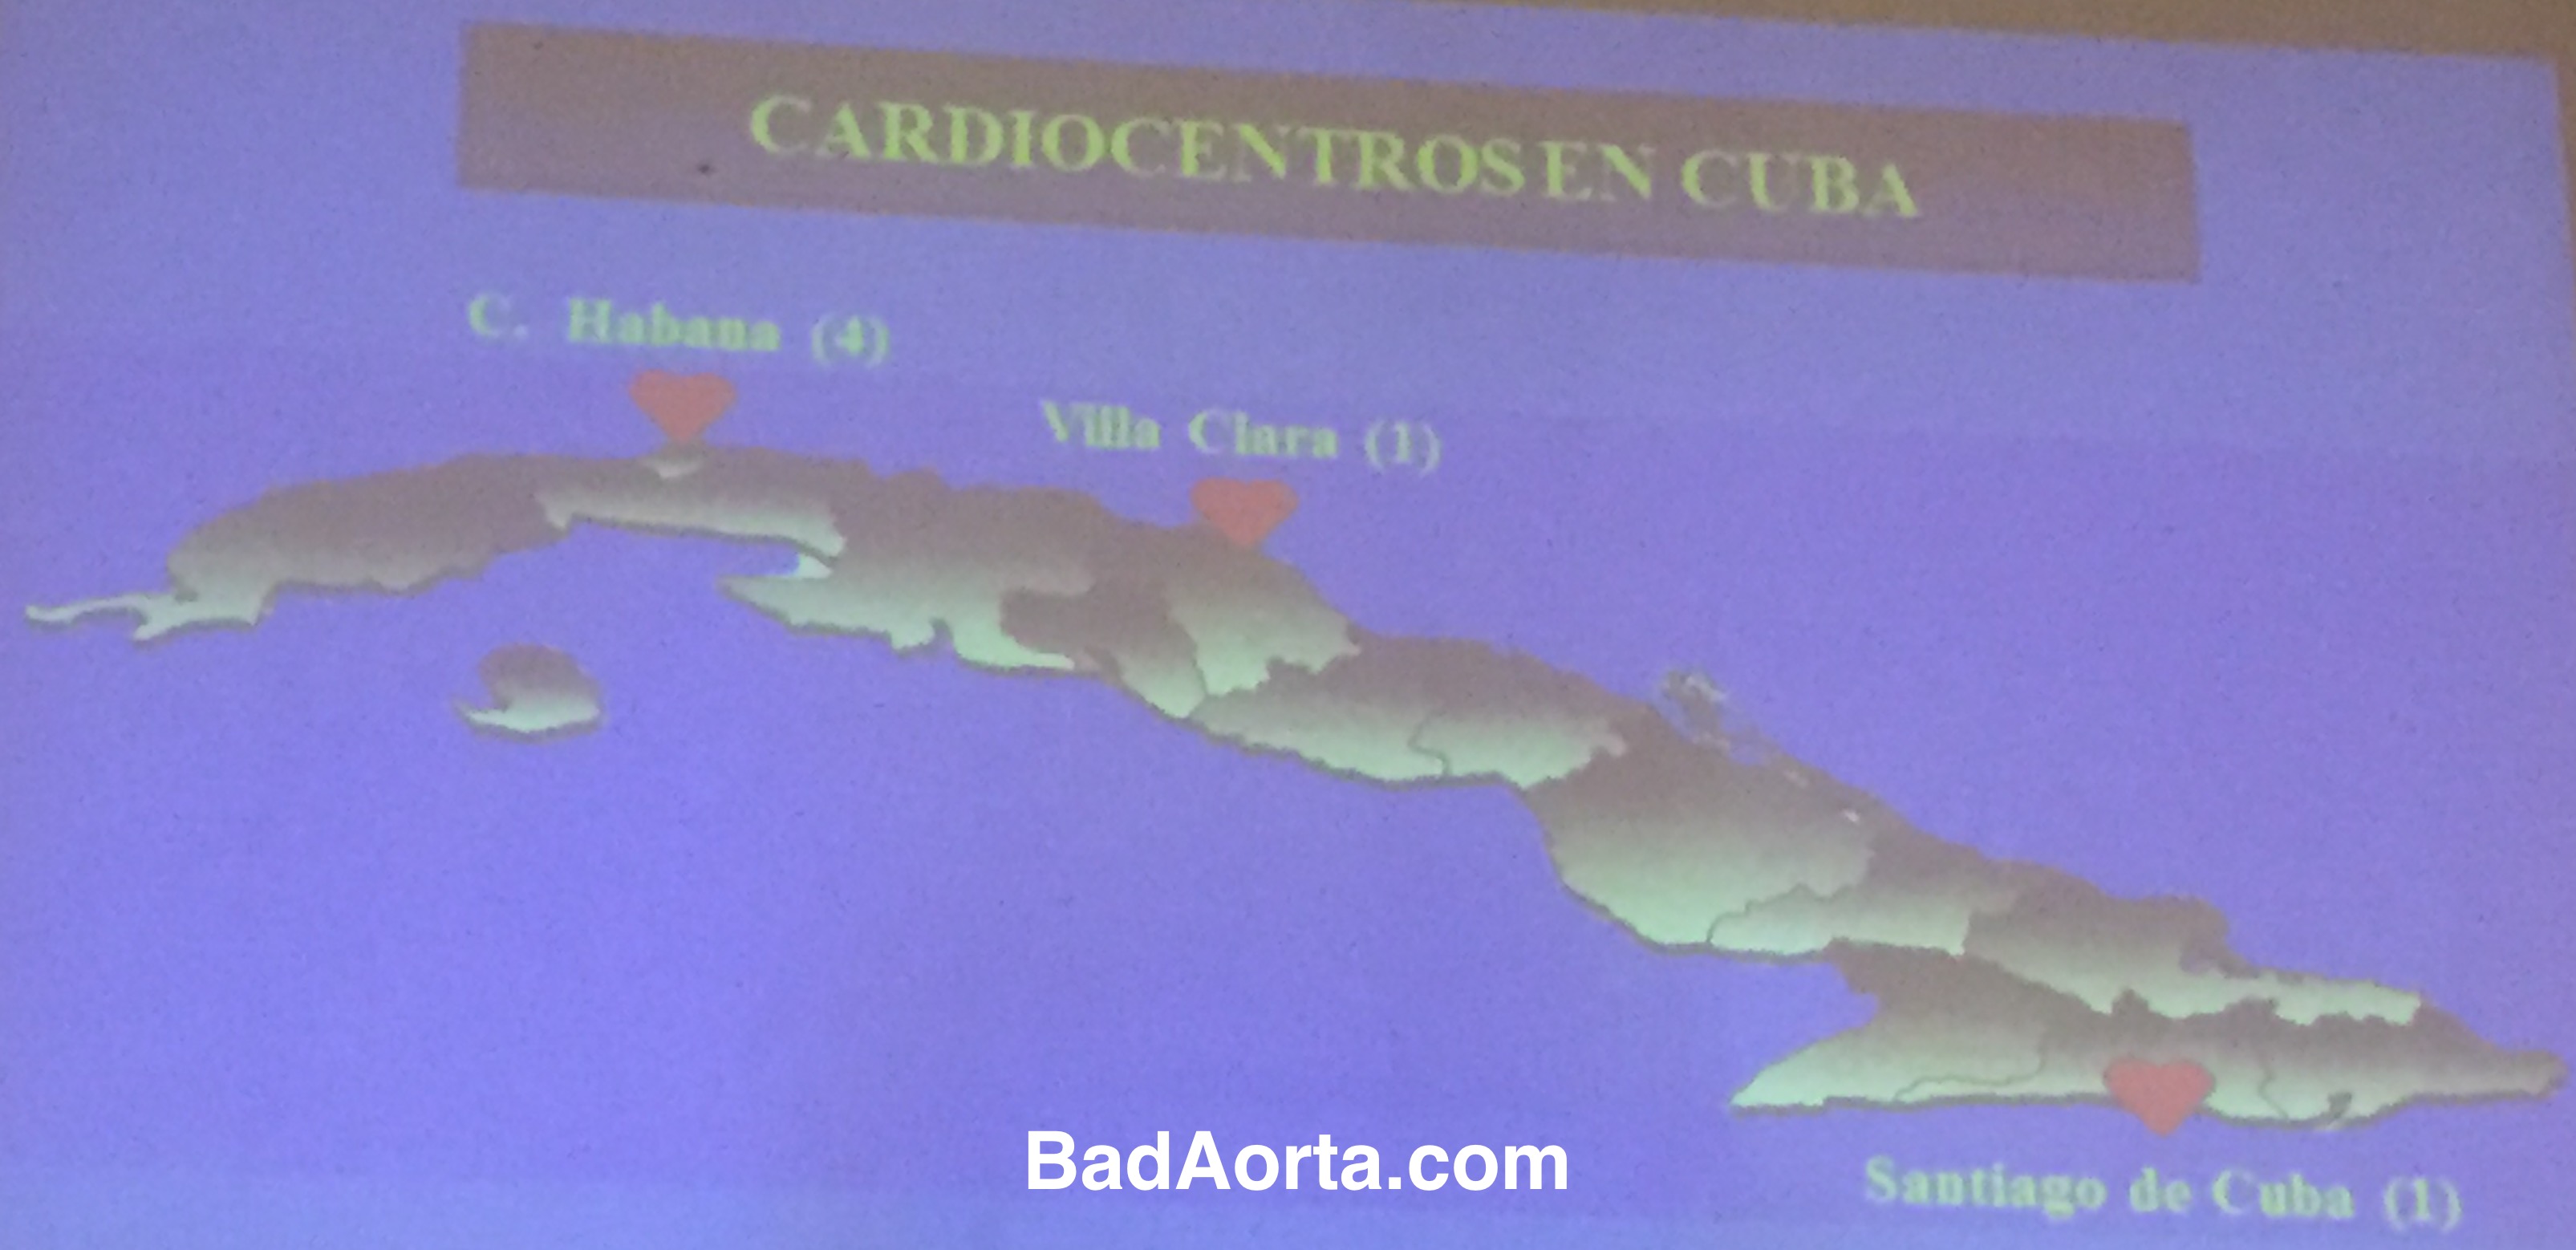 Centralization of Heart Surgery in Cuba by the Ministry of Health